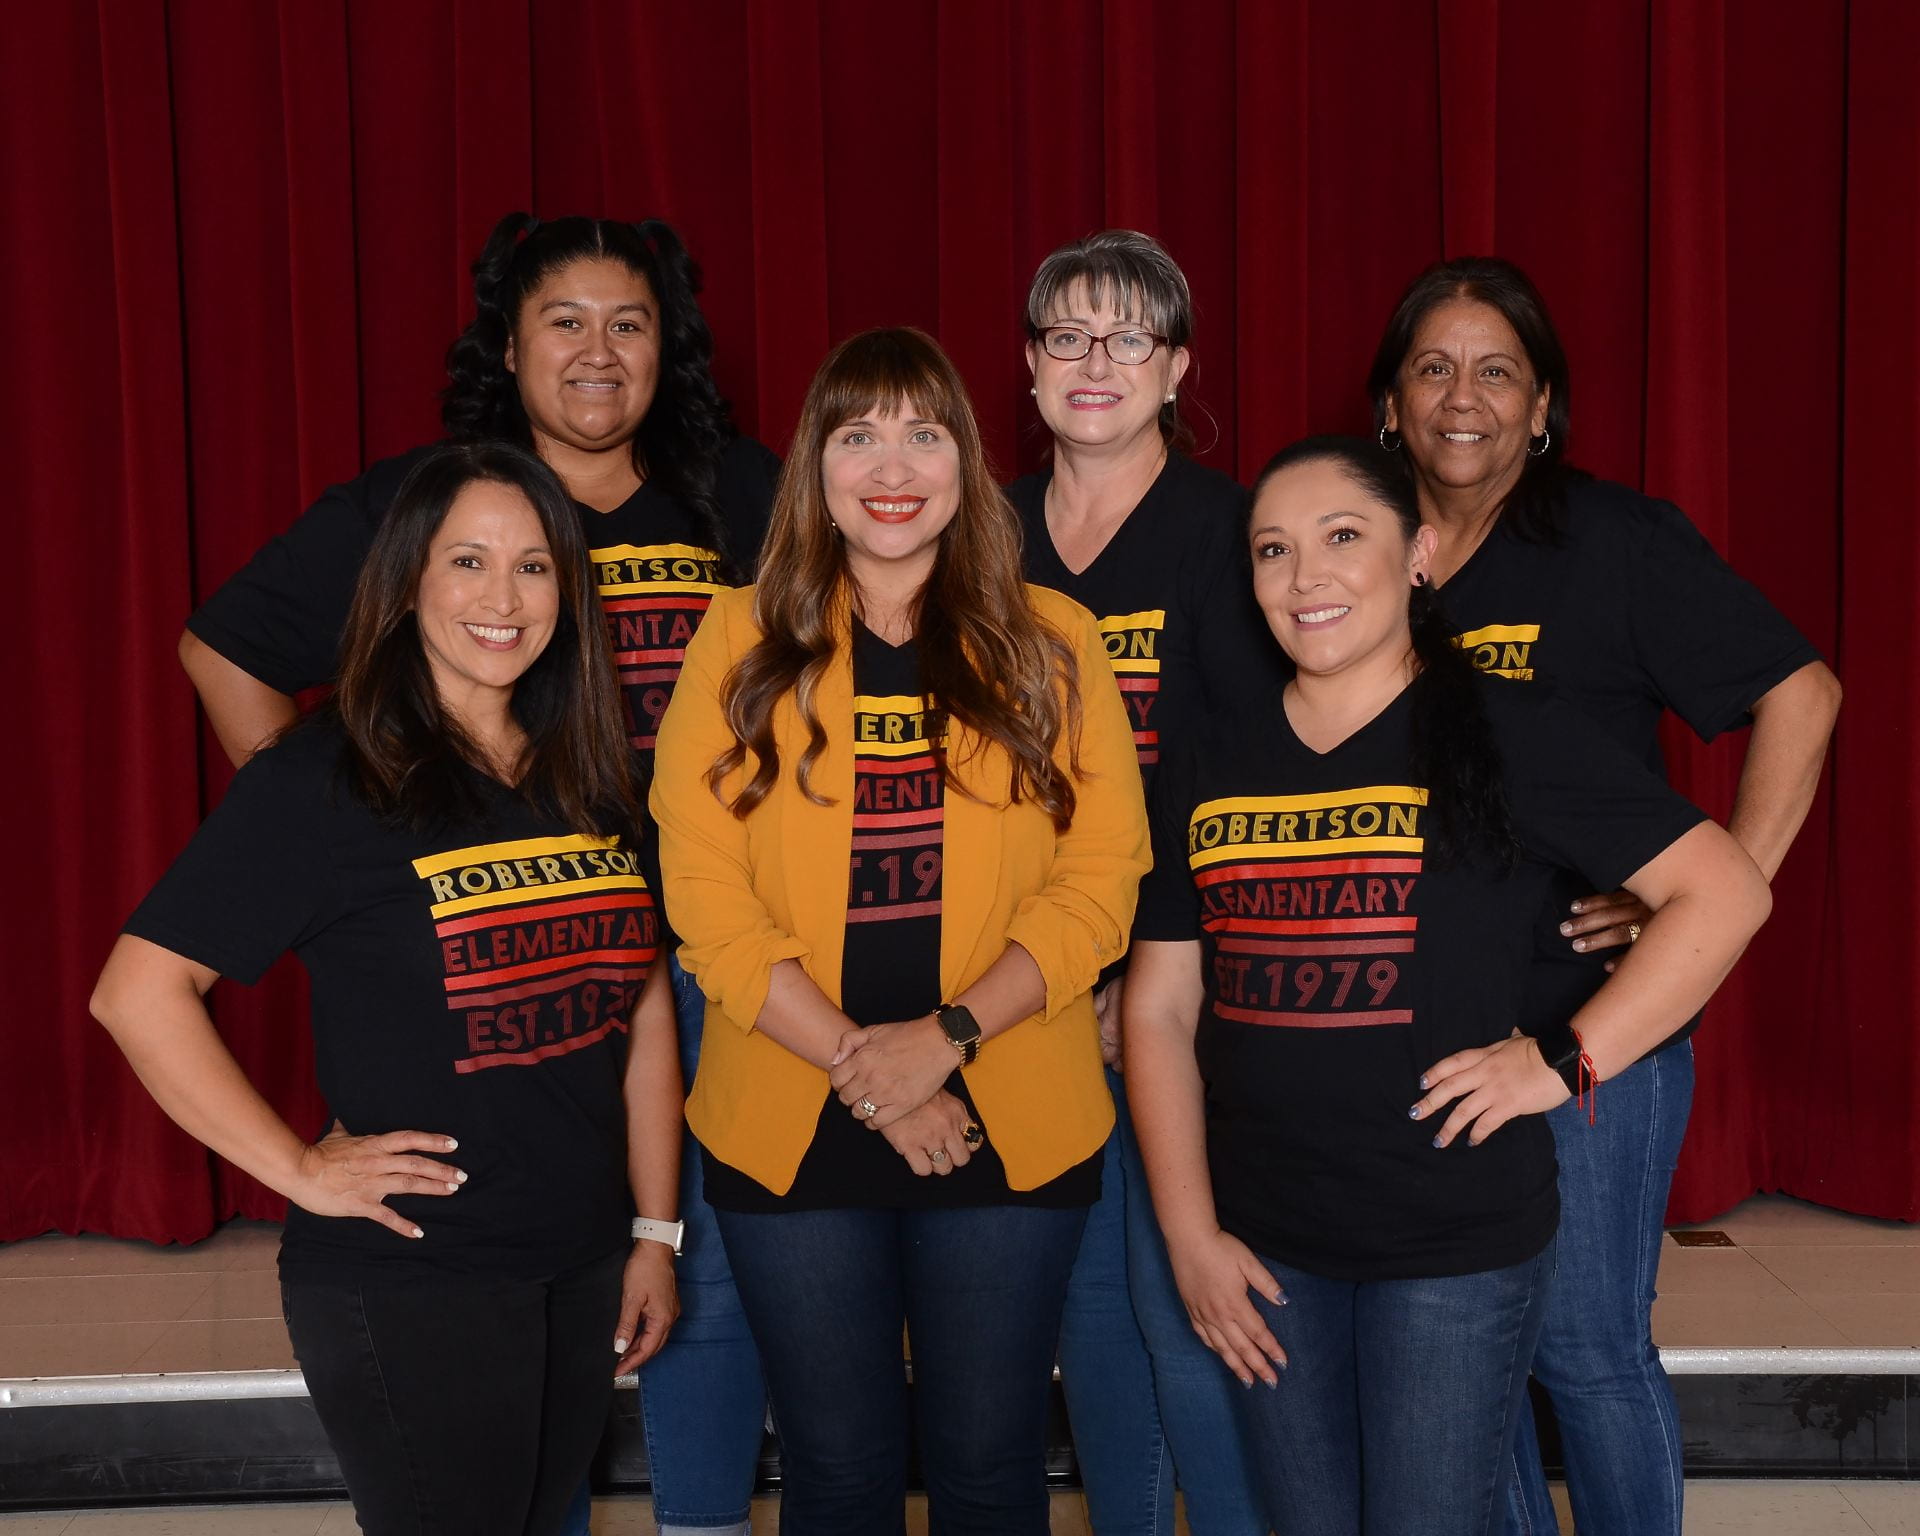 Front office and administrative staff members wearing matching school shirts, on a dark background.